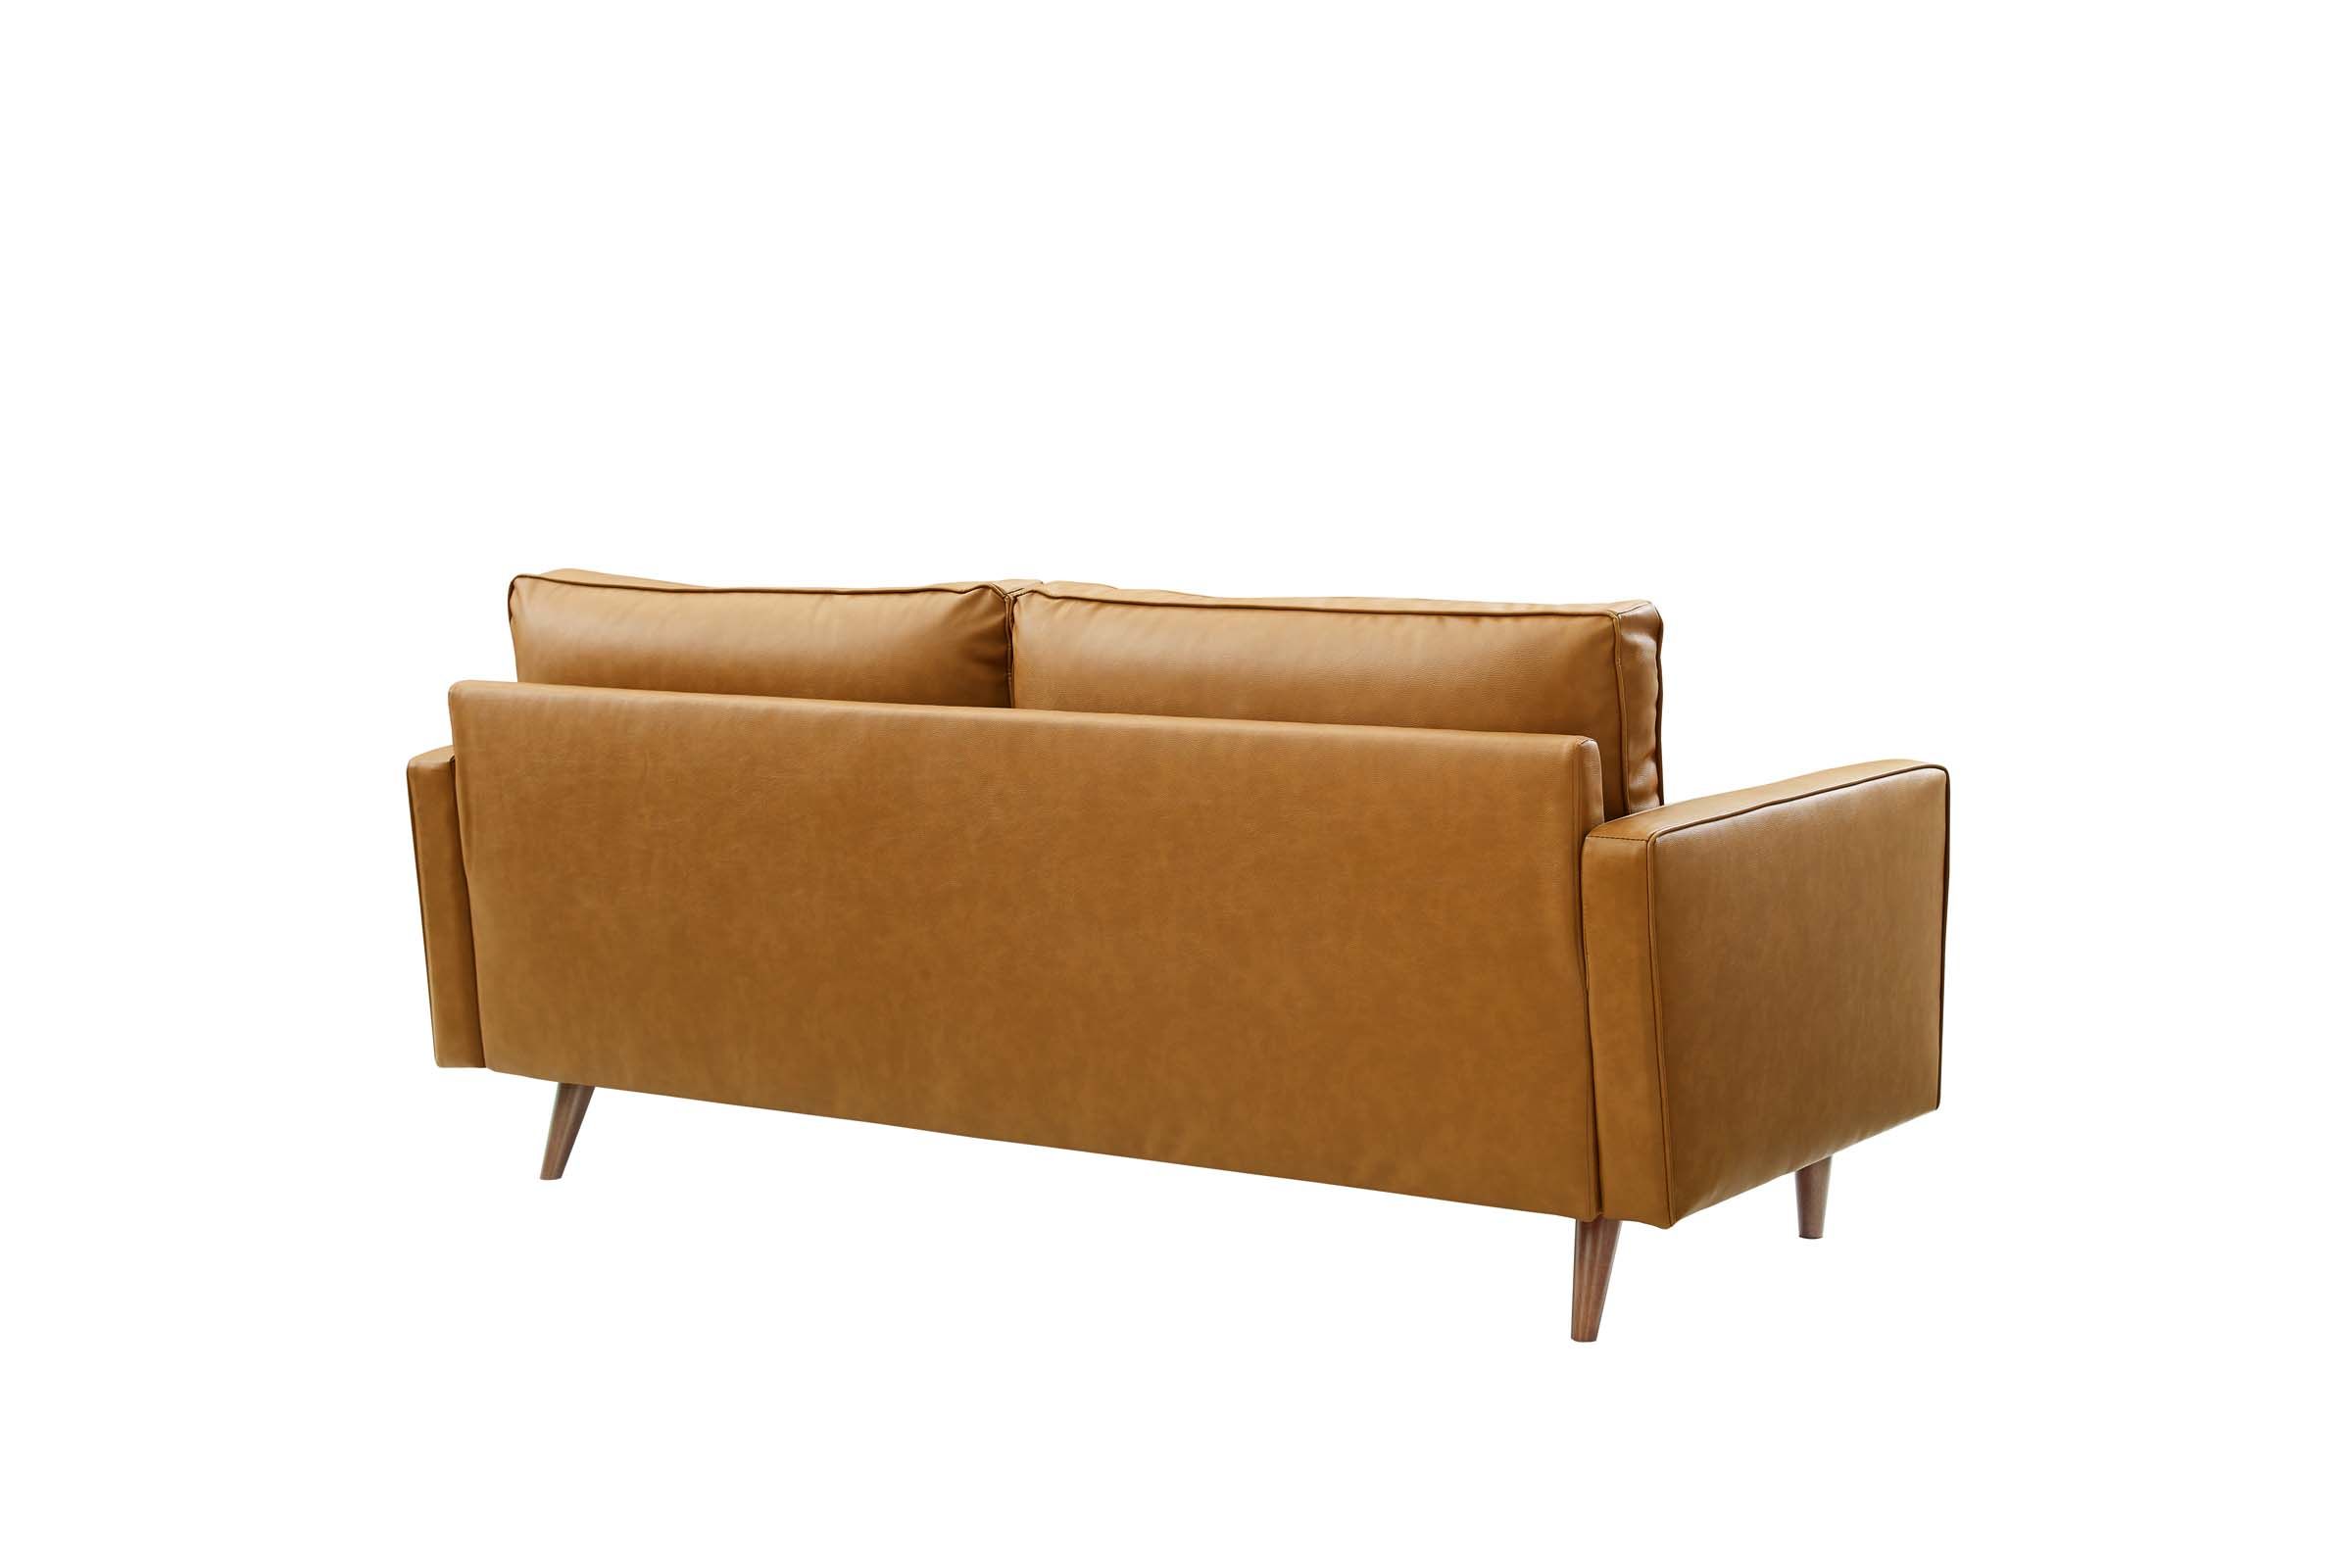 valour upholstered faux leather sofa in tan